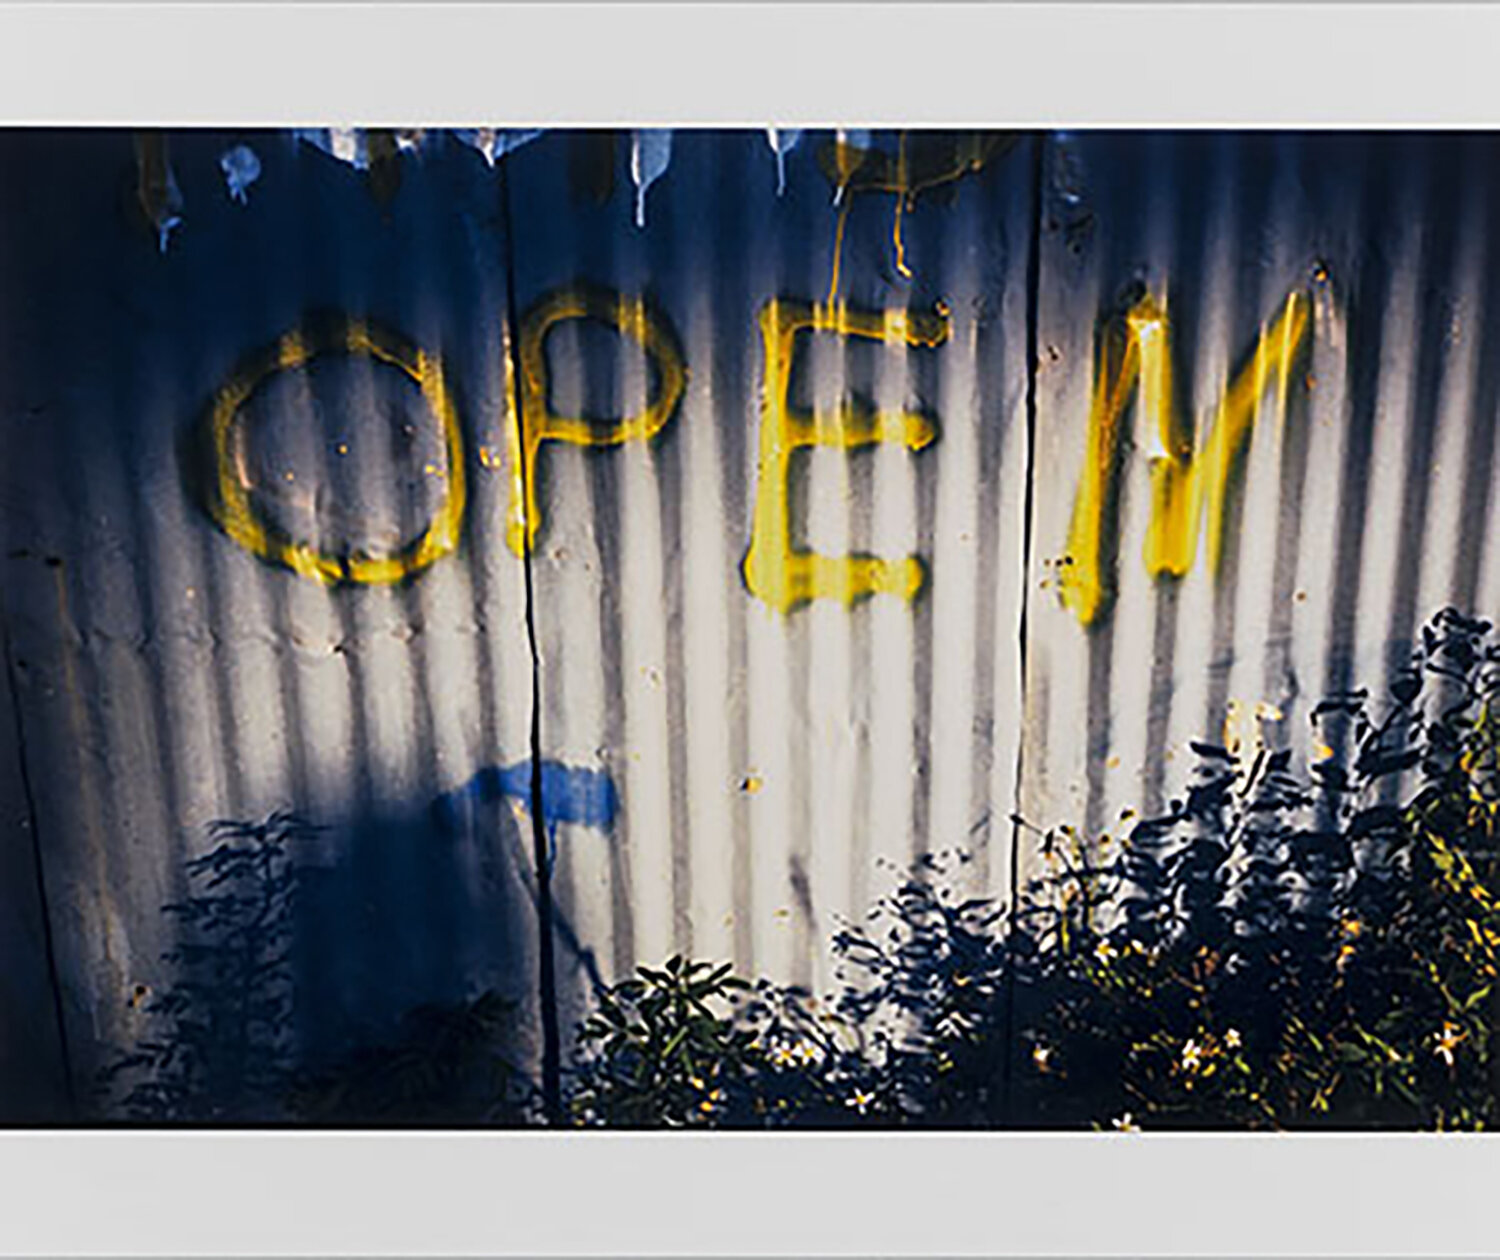   Open, New Orleans , 2003 Edition: 4/25 16 x 24 in. — Image Size The Do Good Fund, Inc., 2018-029 